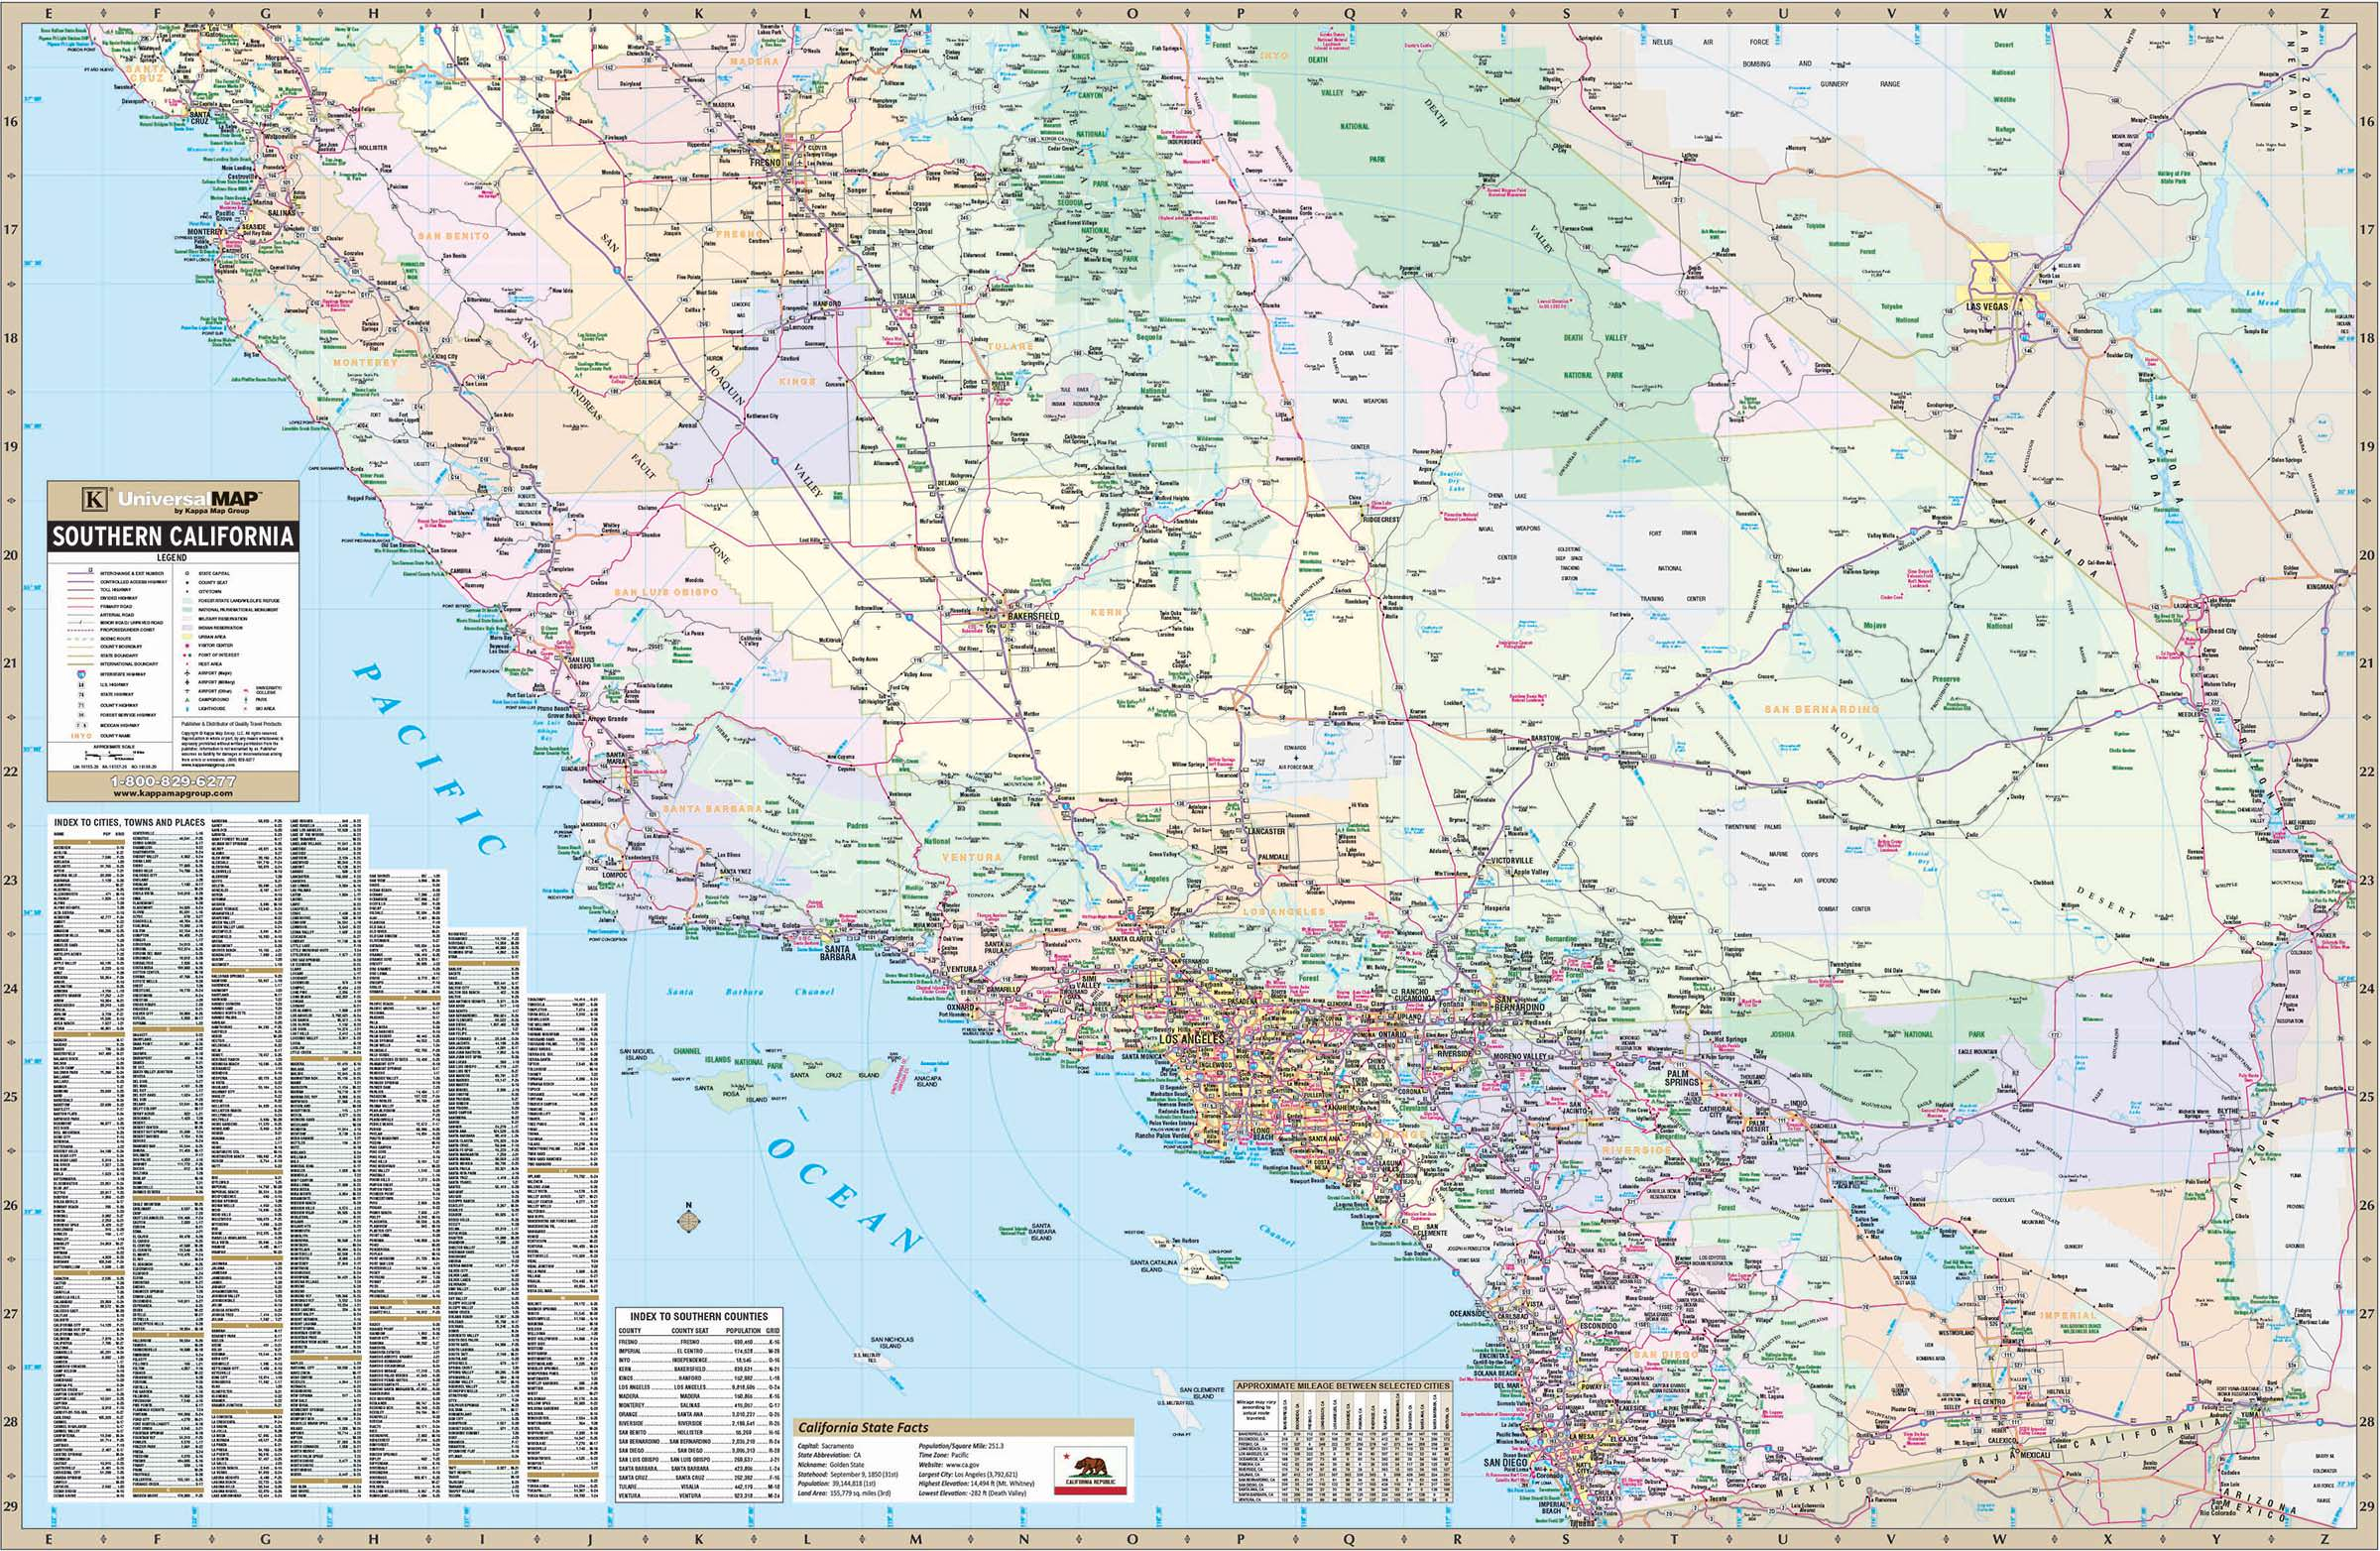 California Map With Cities Southern California Wall Map - Klipy - California Wall Map